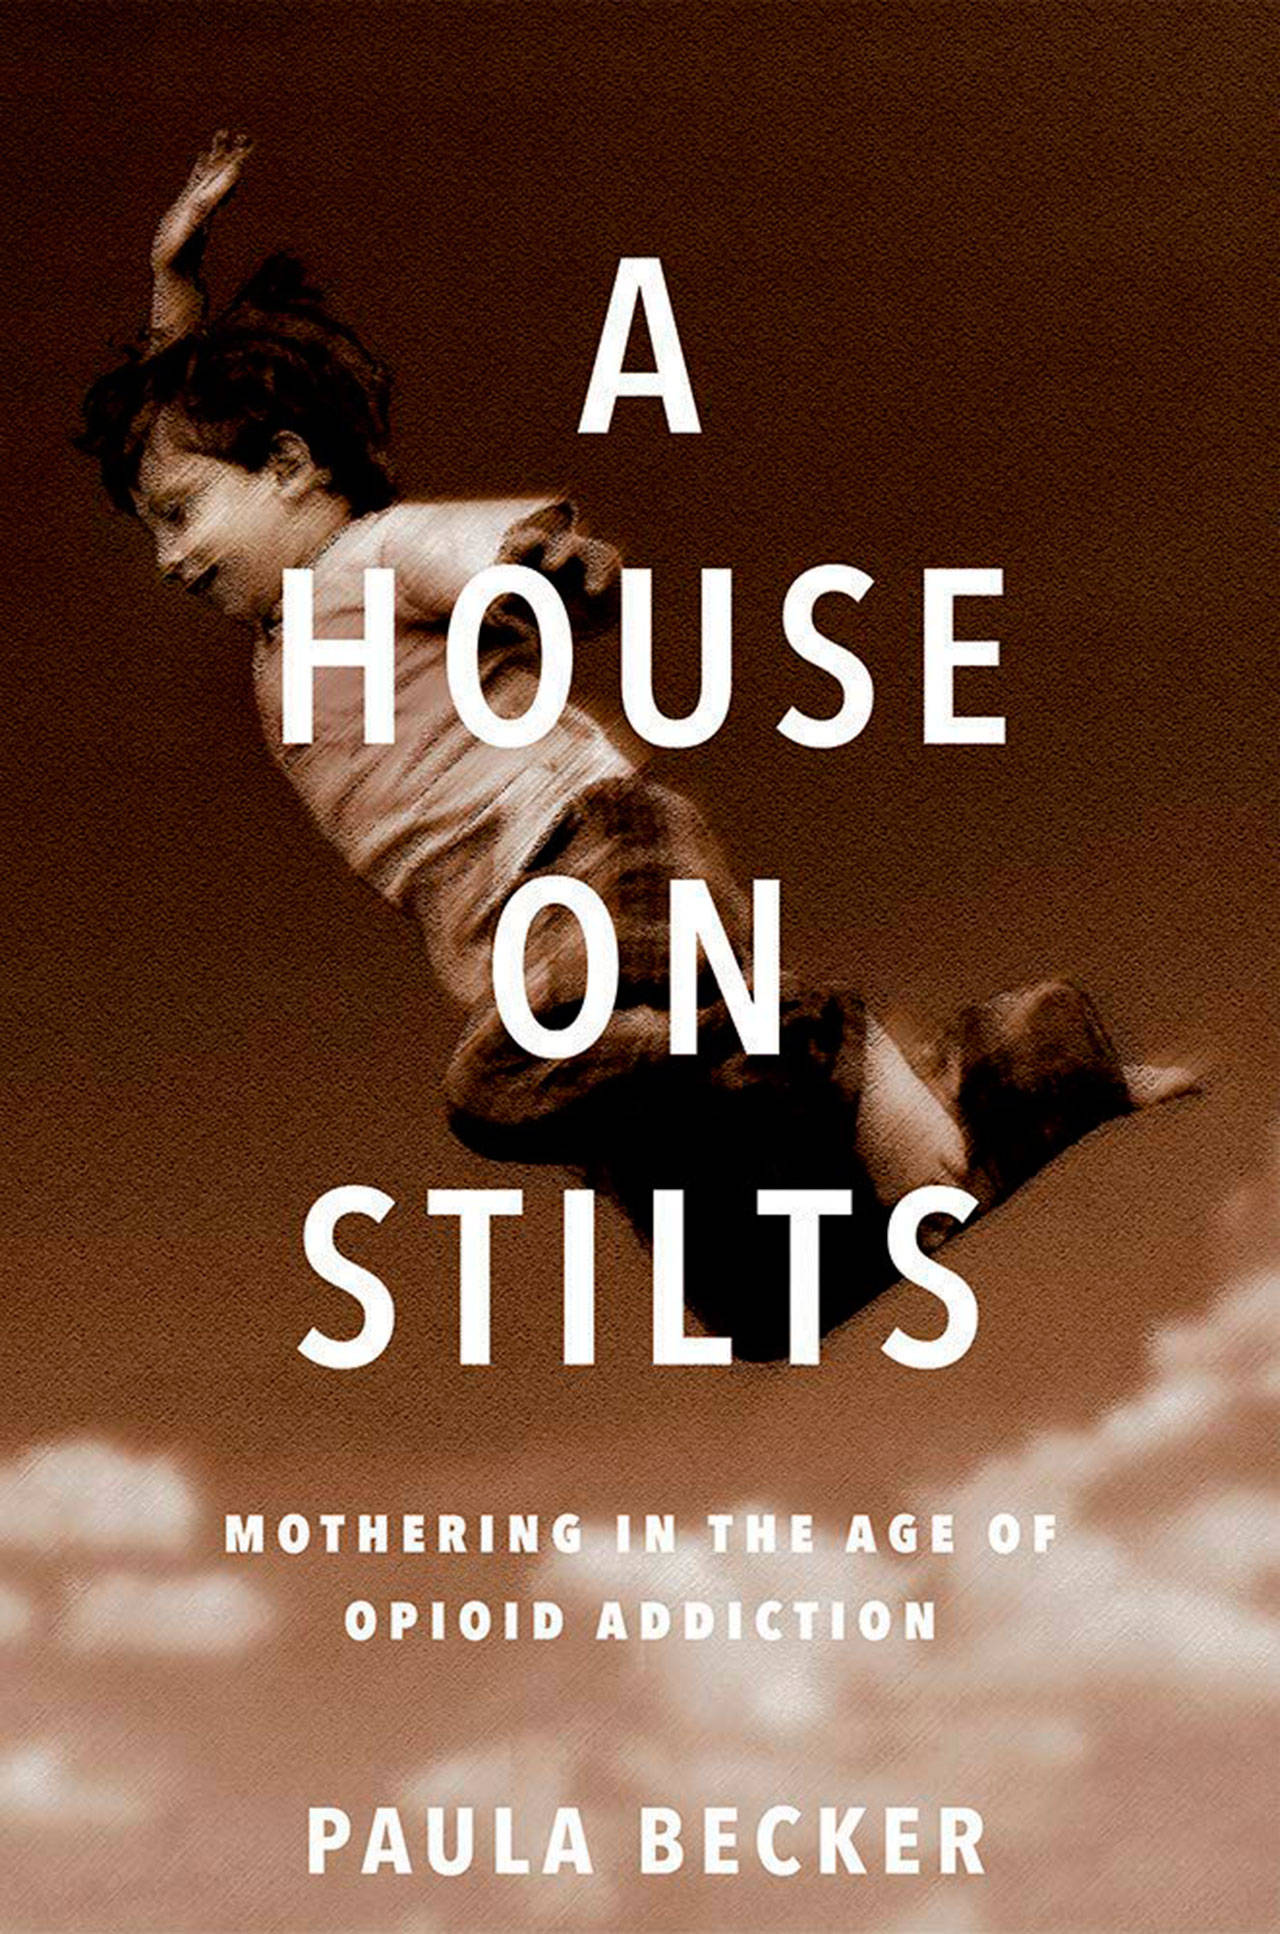 Image courtesy of Eagle Harbor Book Company | Paula Becker will visit Eagle Harbor Book Company to discuss her latest work “A House on Stilts: Mothering in the Age of Opioid Addiction” at 7 p.m. Thursday, Oct. 17.